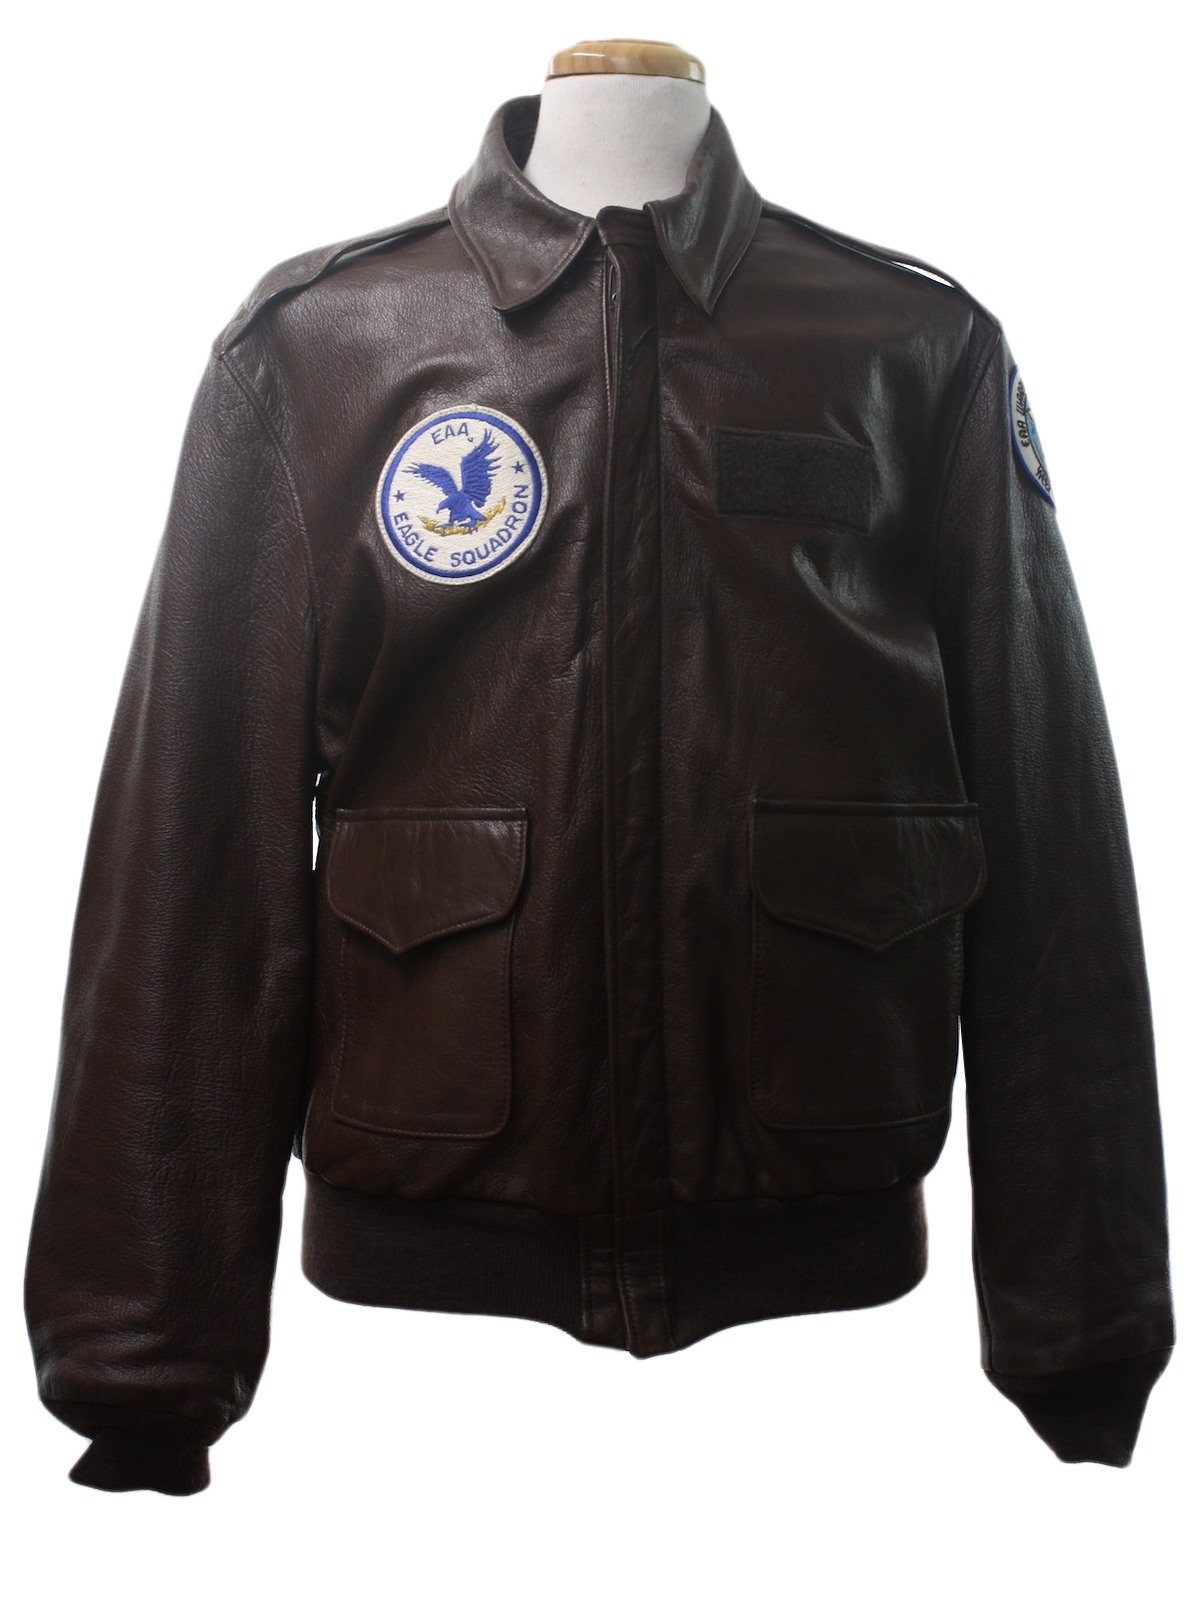 1980s Leather Jacket: 80s -Type a2 flight jacket a.c.order no. 42-1446 ...